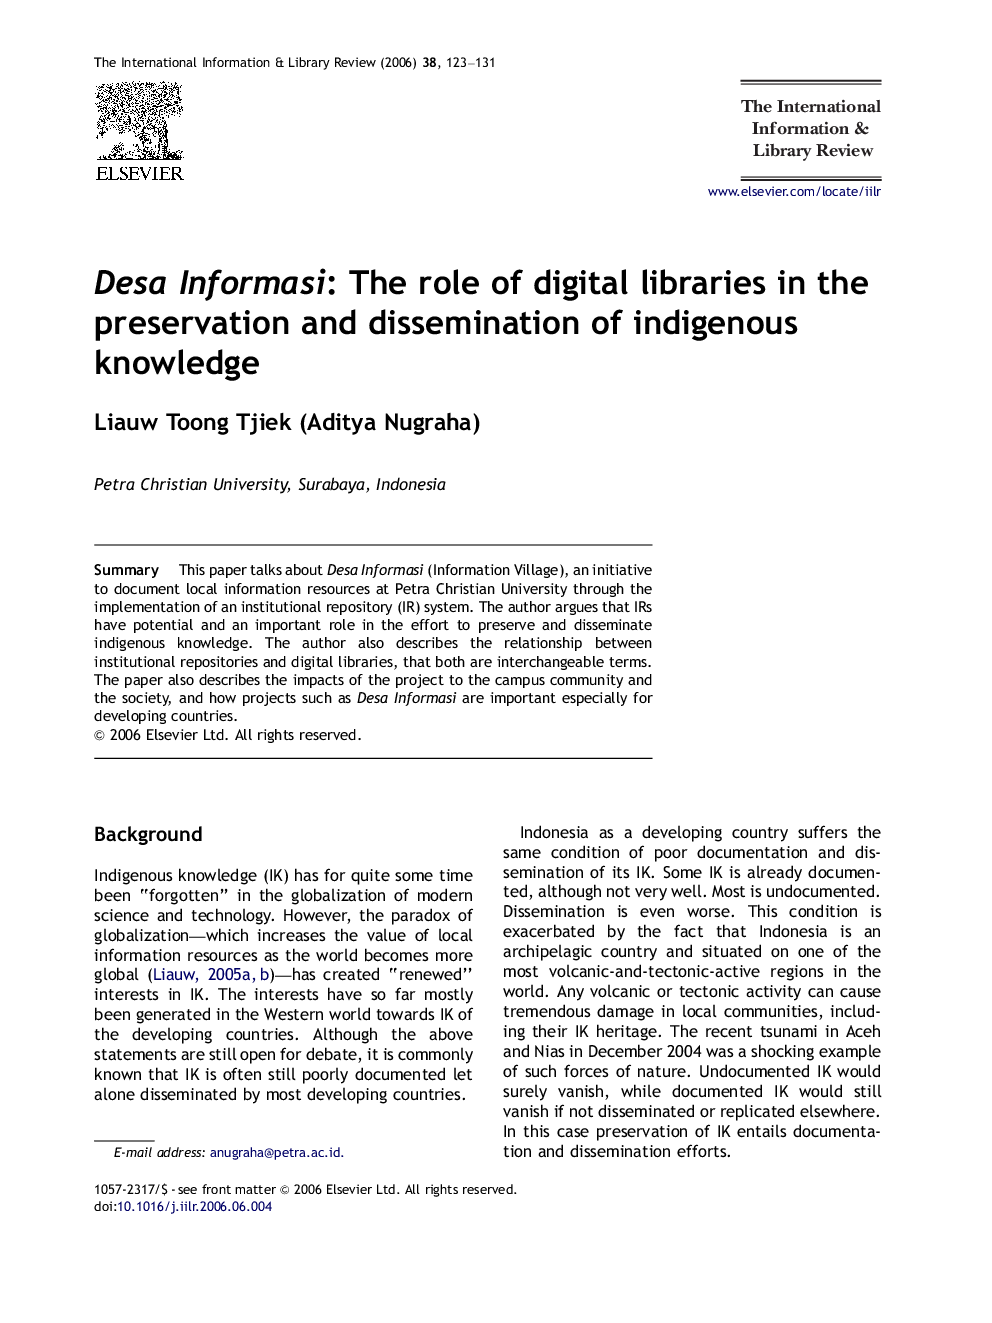 Desa Informasi: The role of digital libraries in the preservation and dissemination of indigenous knowledge